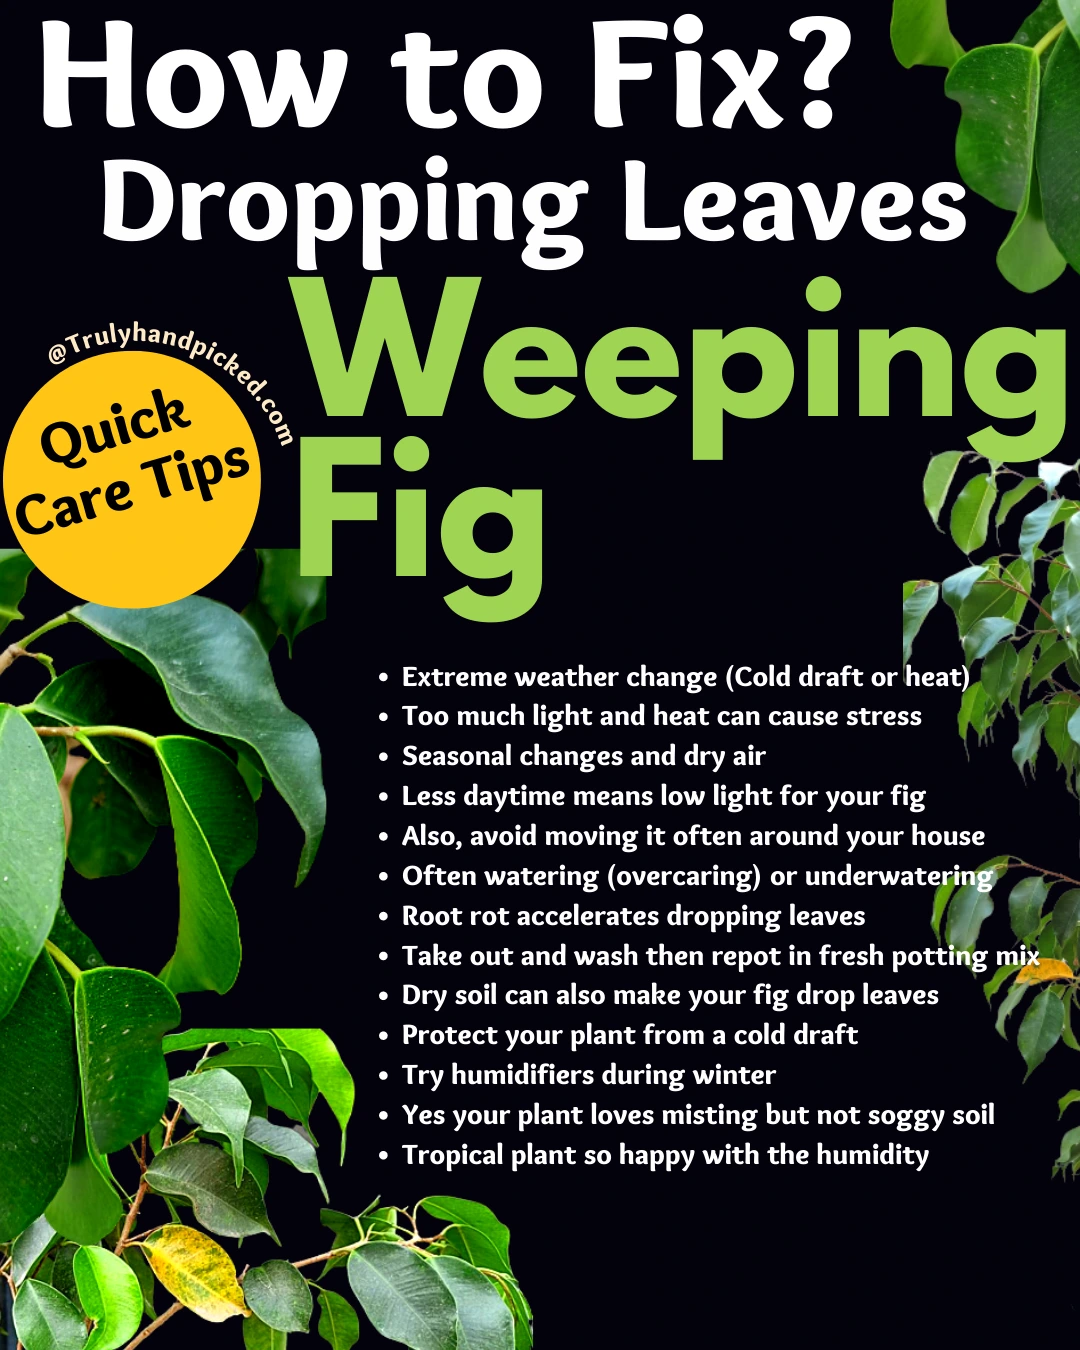 Weeping Fig Dropping Leaves Quick Plant Care Tips for Fiscus Benjamina